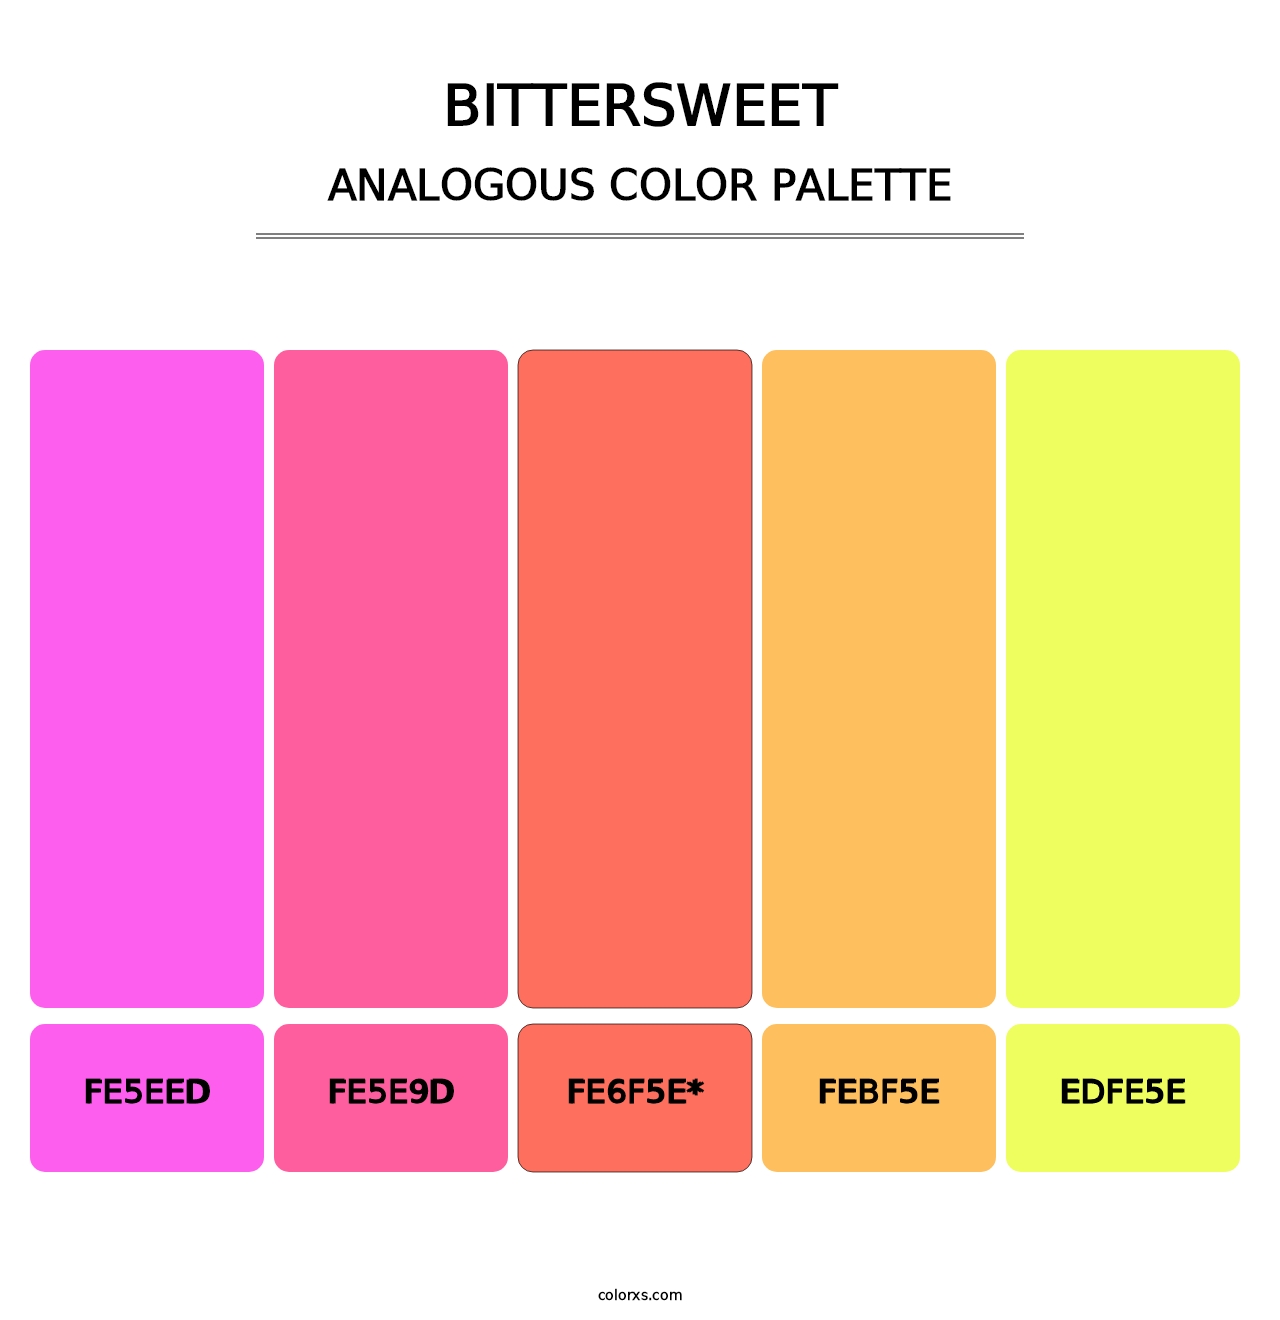 Bittersweet - Analogous Color Palette